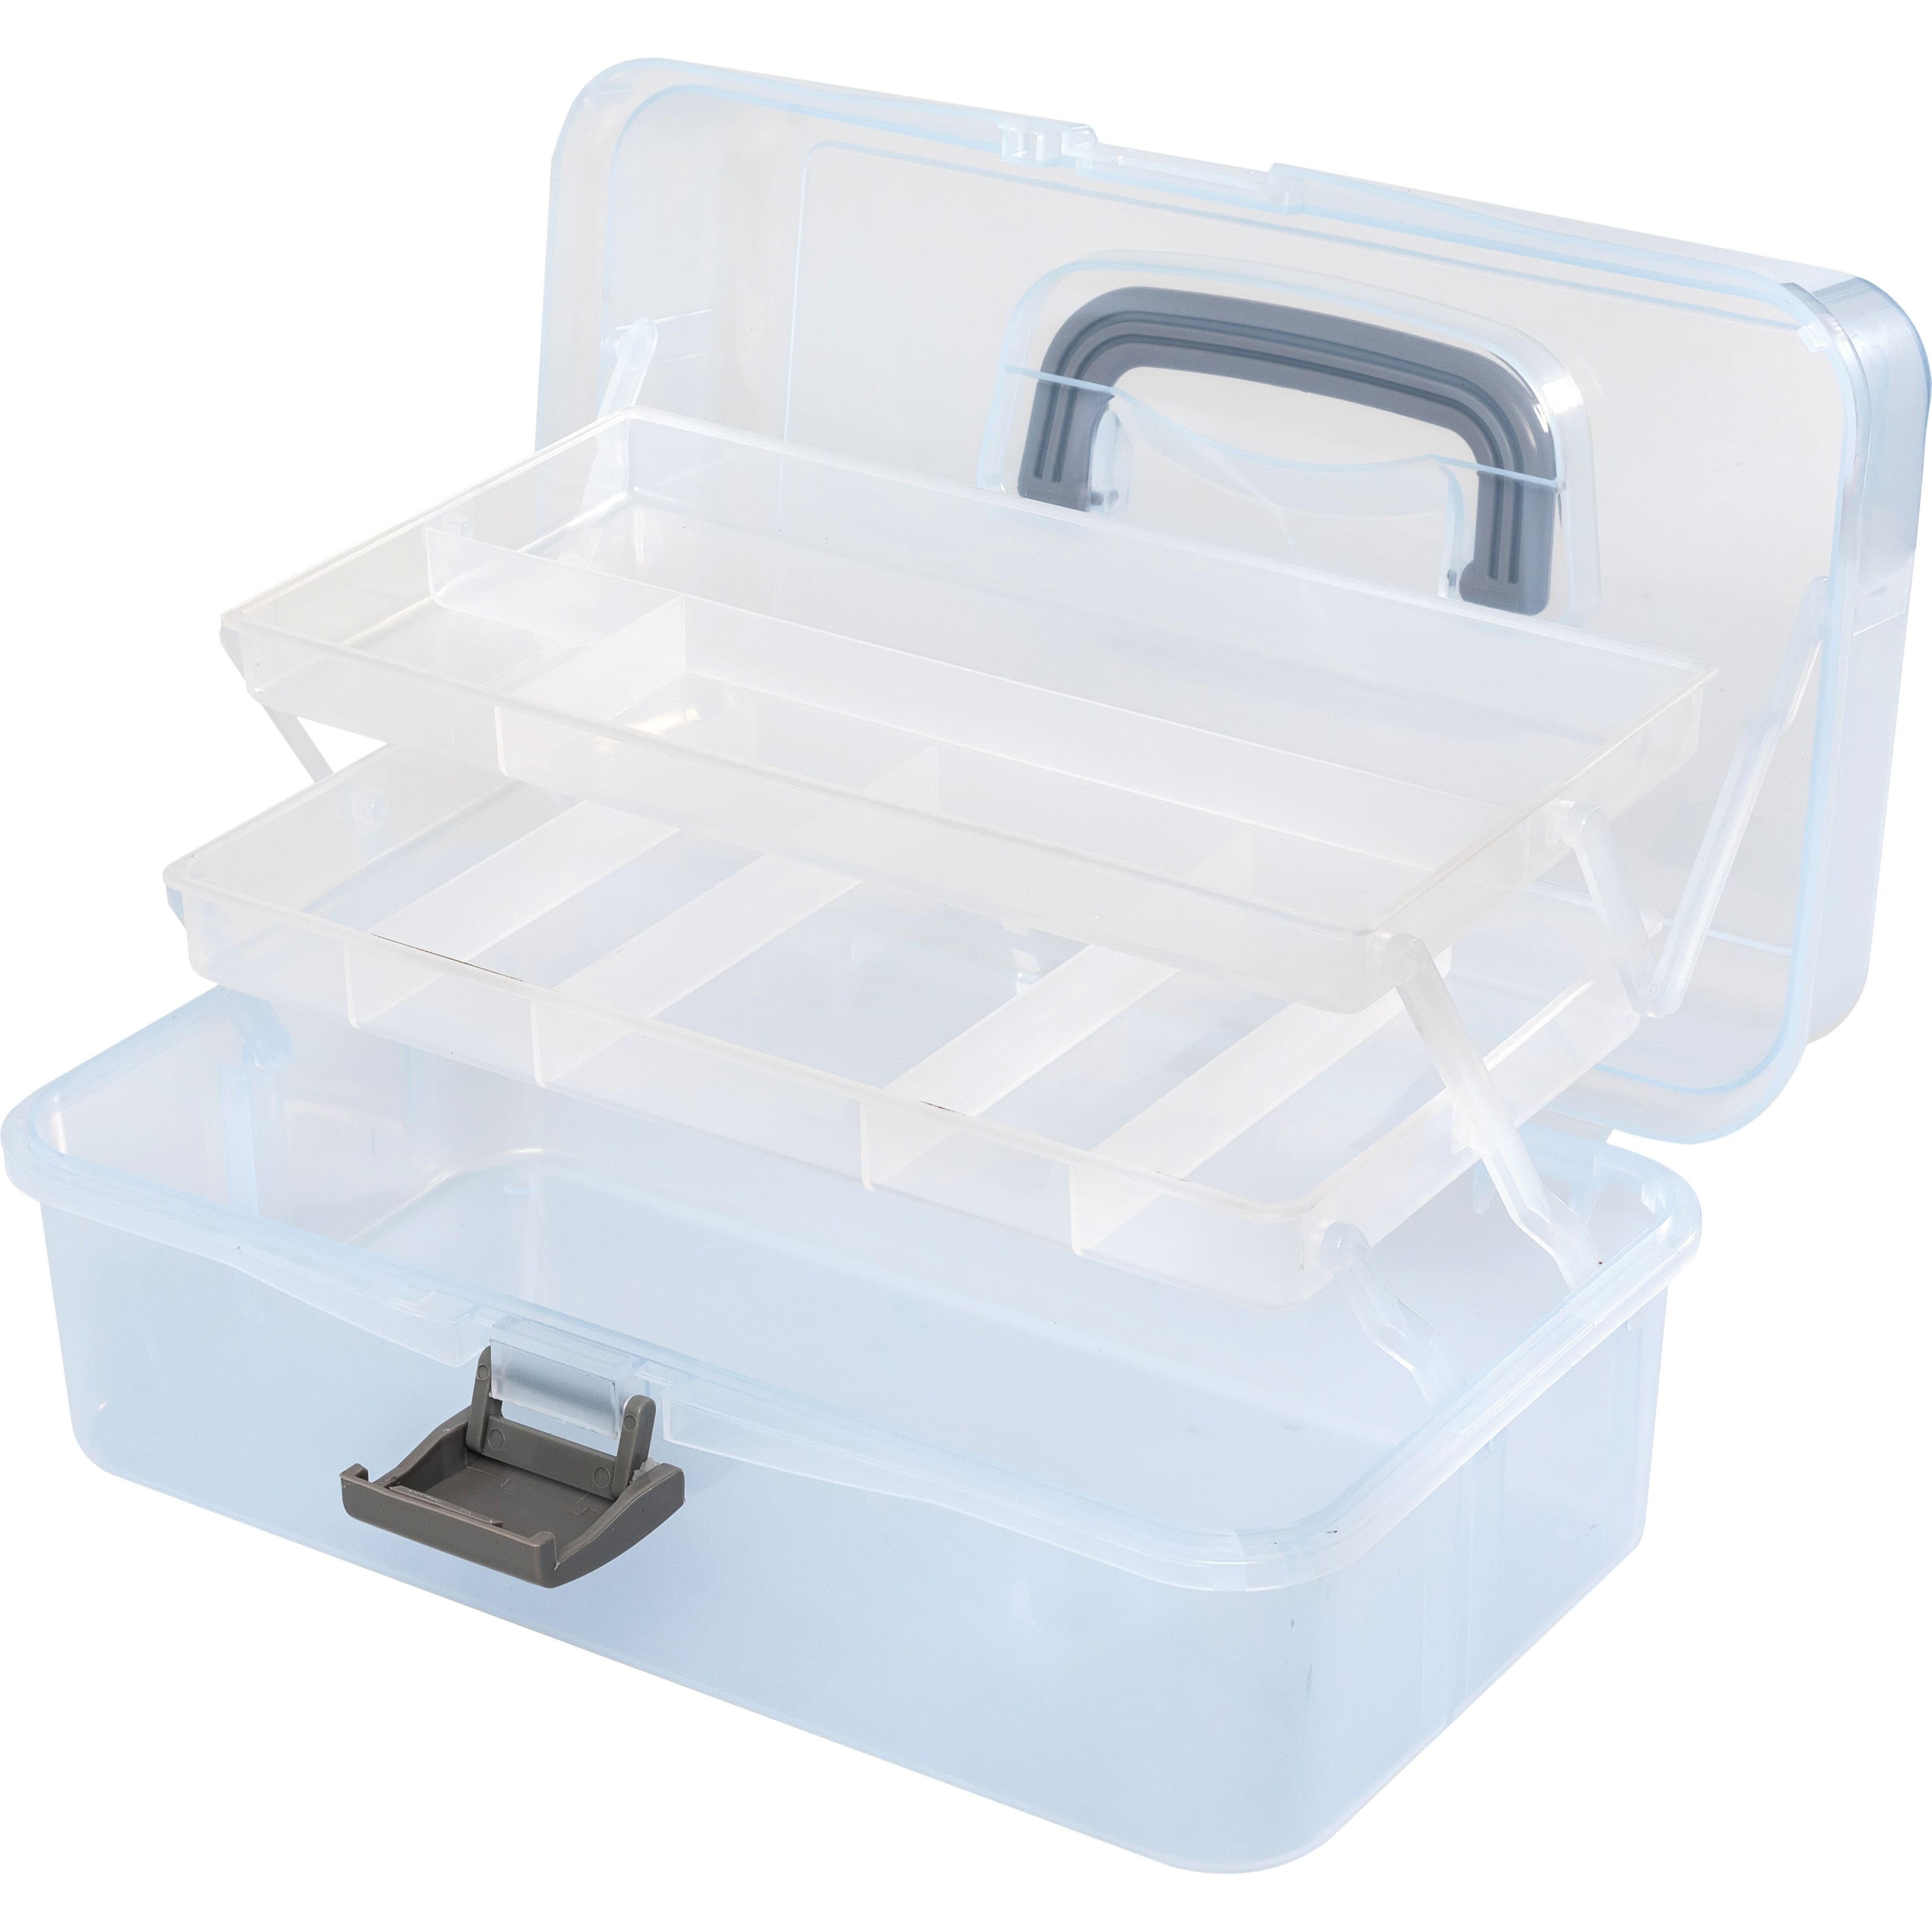 We R Memory Keepers® Translucent Craft Tool Box